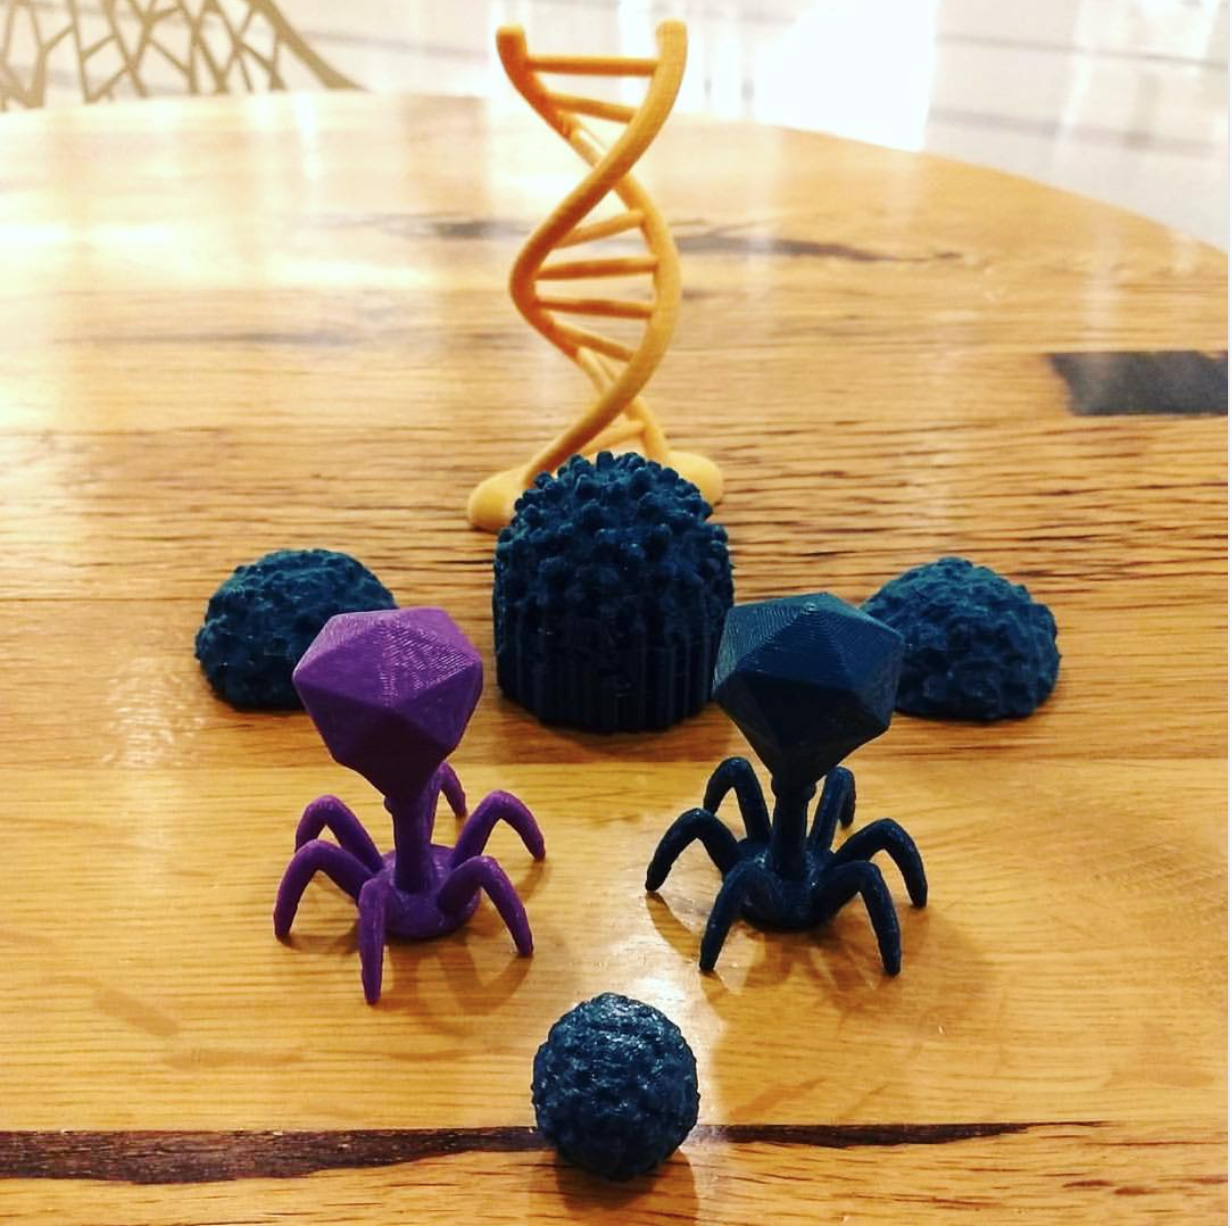 Purple and blue 3D printed viruses, including bacteriophages, are sitting in front of a yellow 3D-printed DNA double helix.